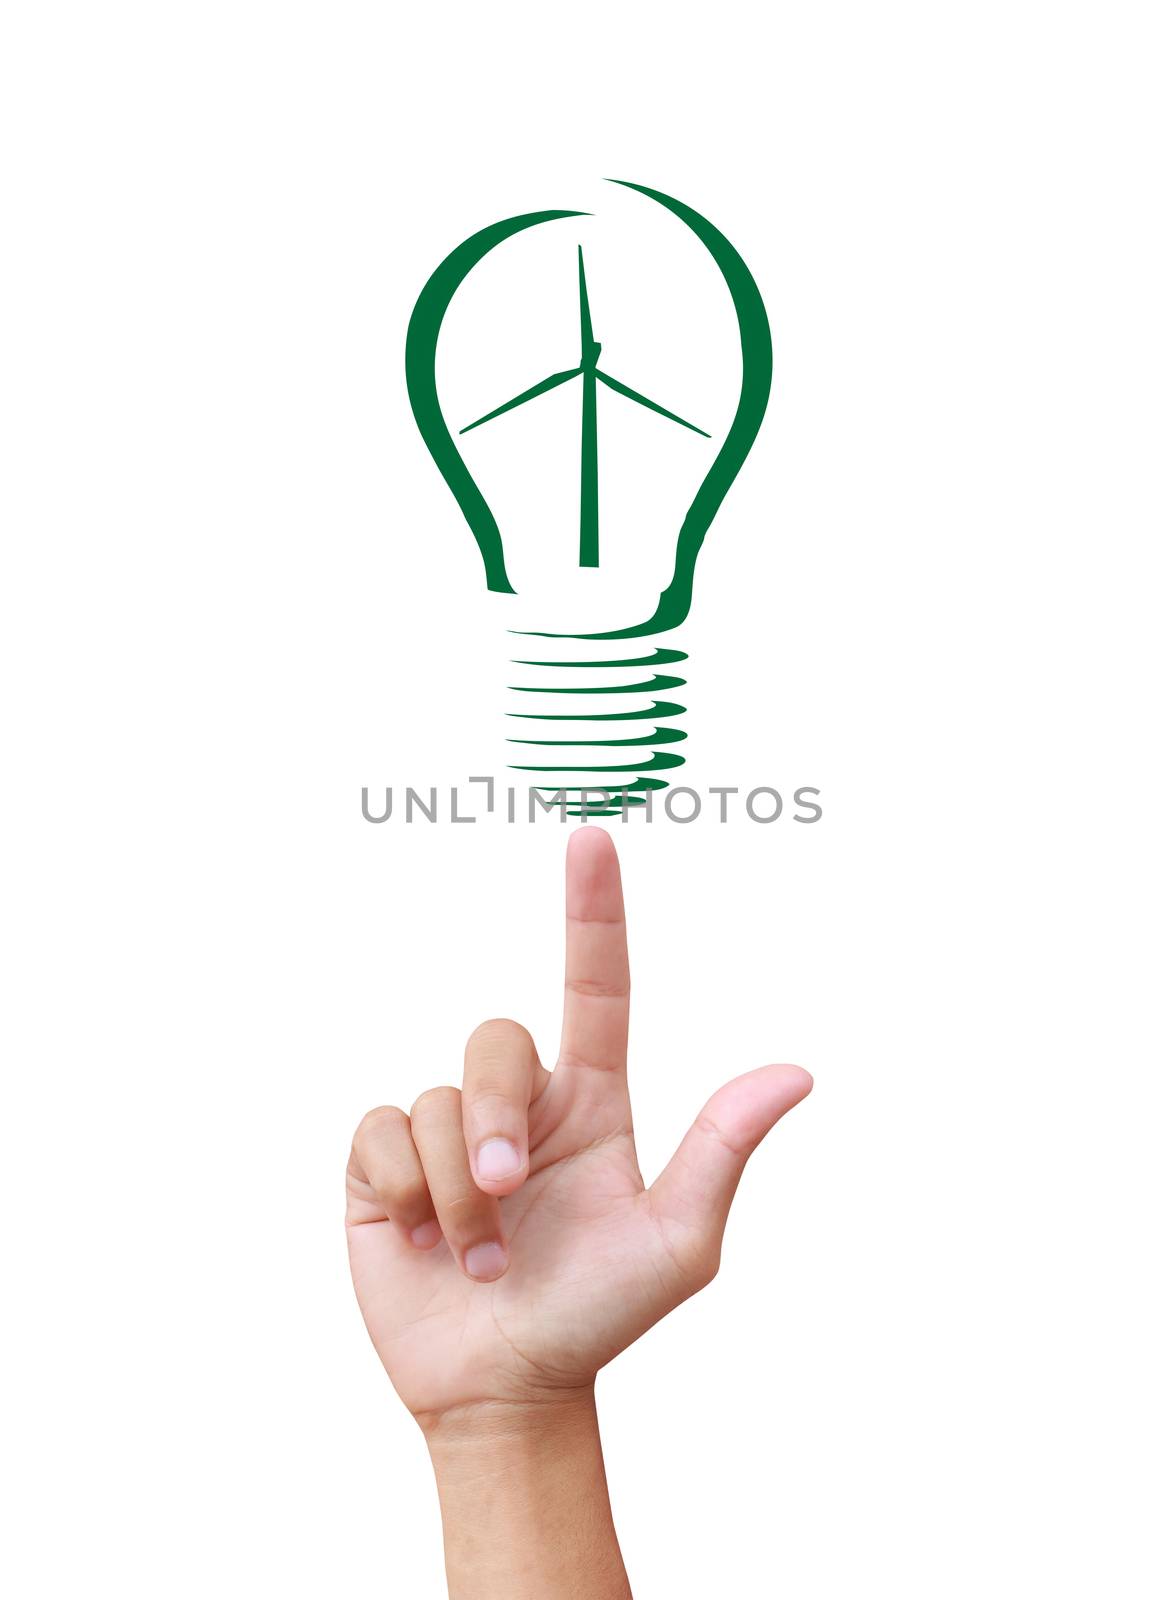  Concept Wind turbine  in light bulb symbol of renewable energy  by rufous